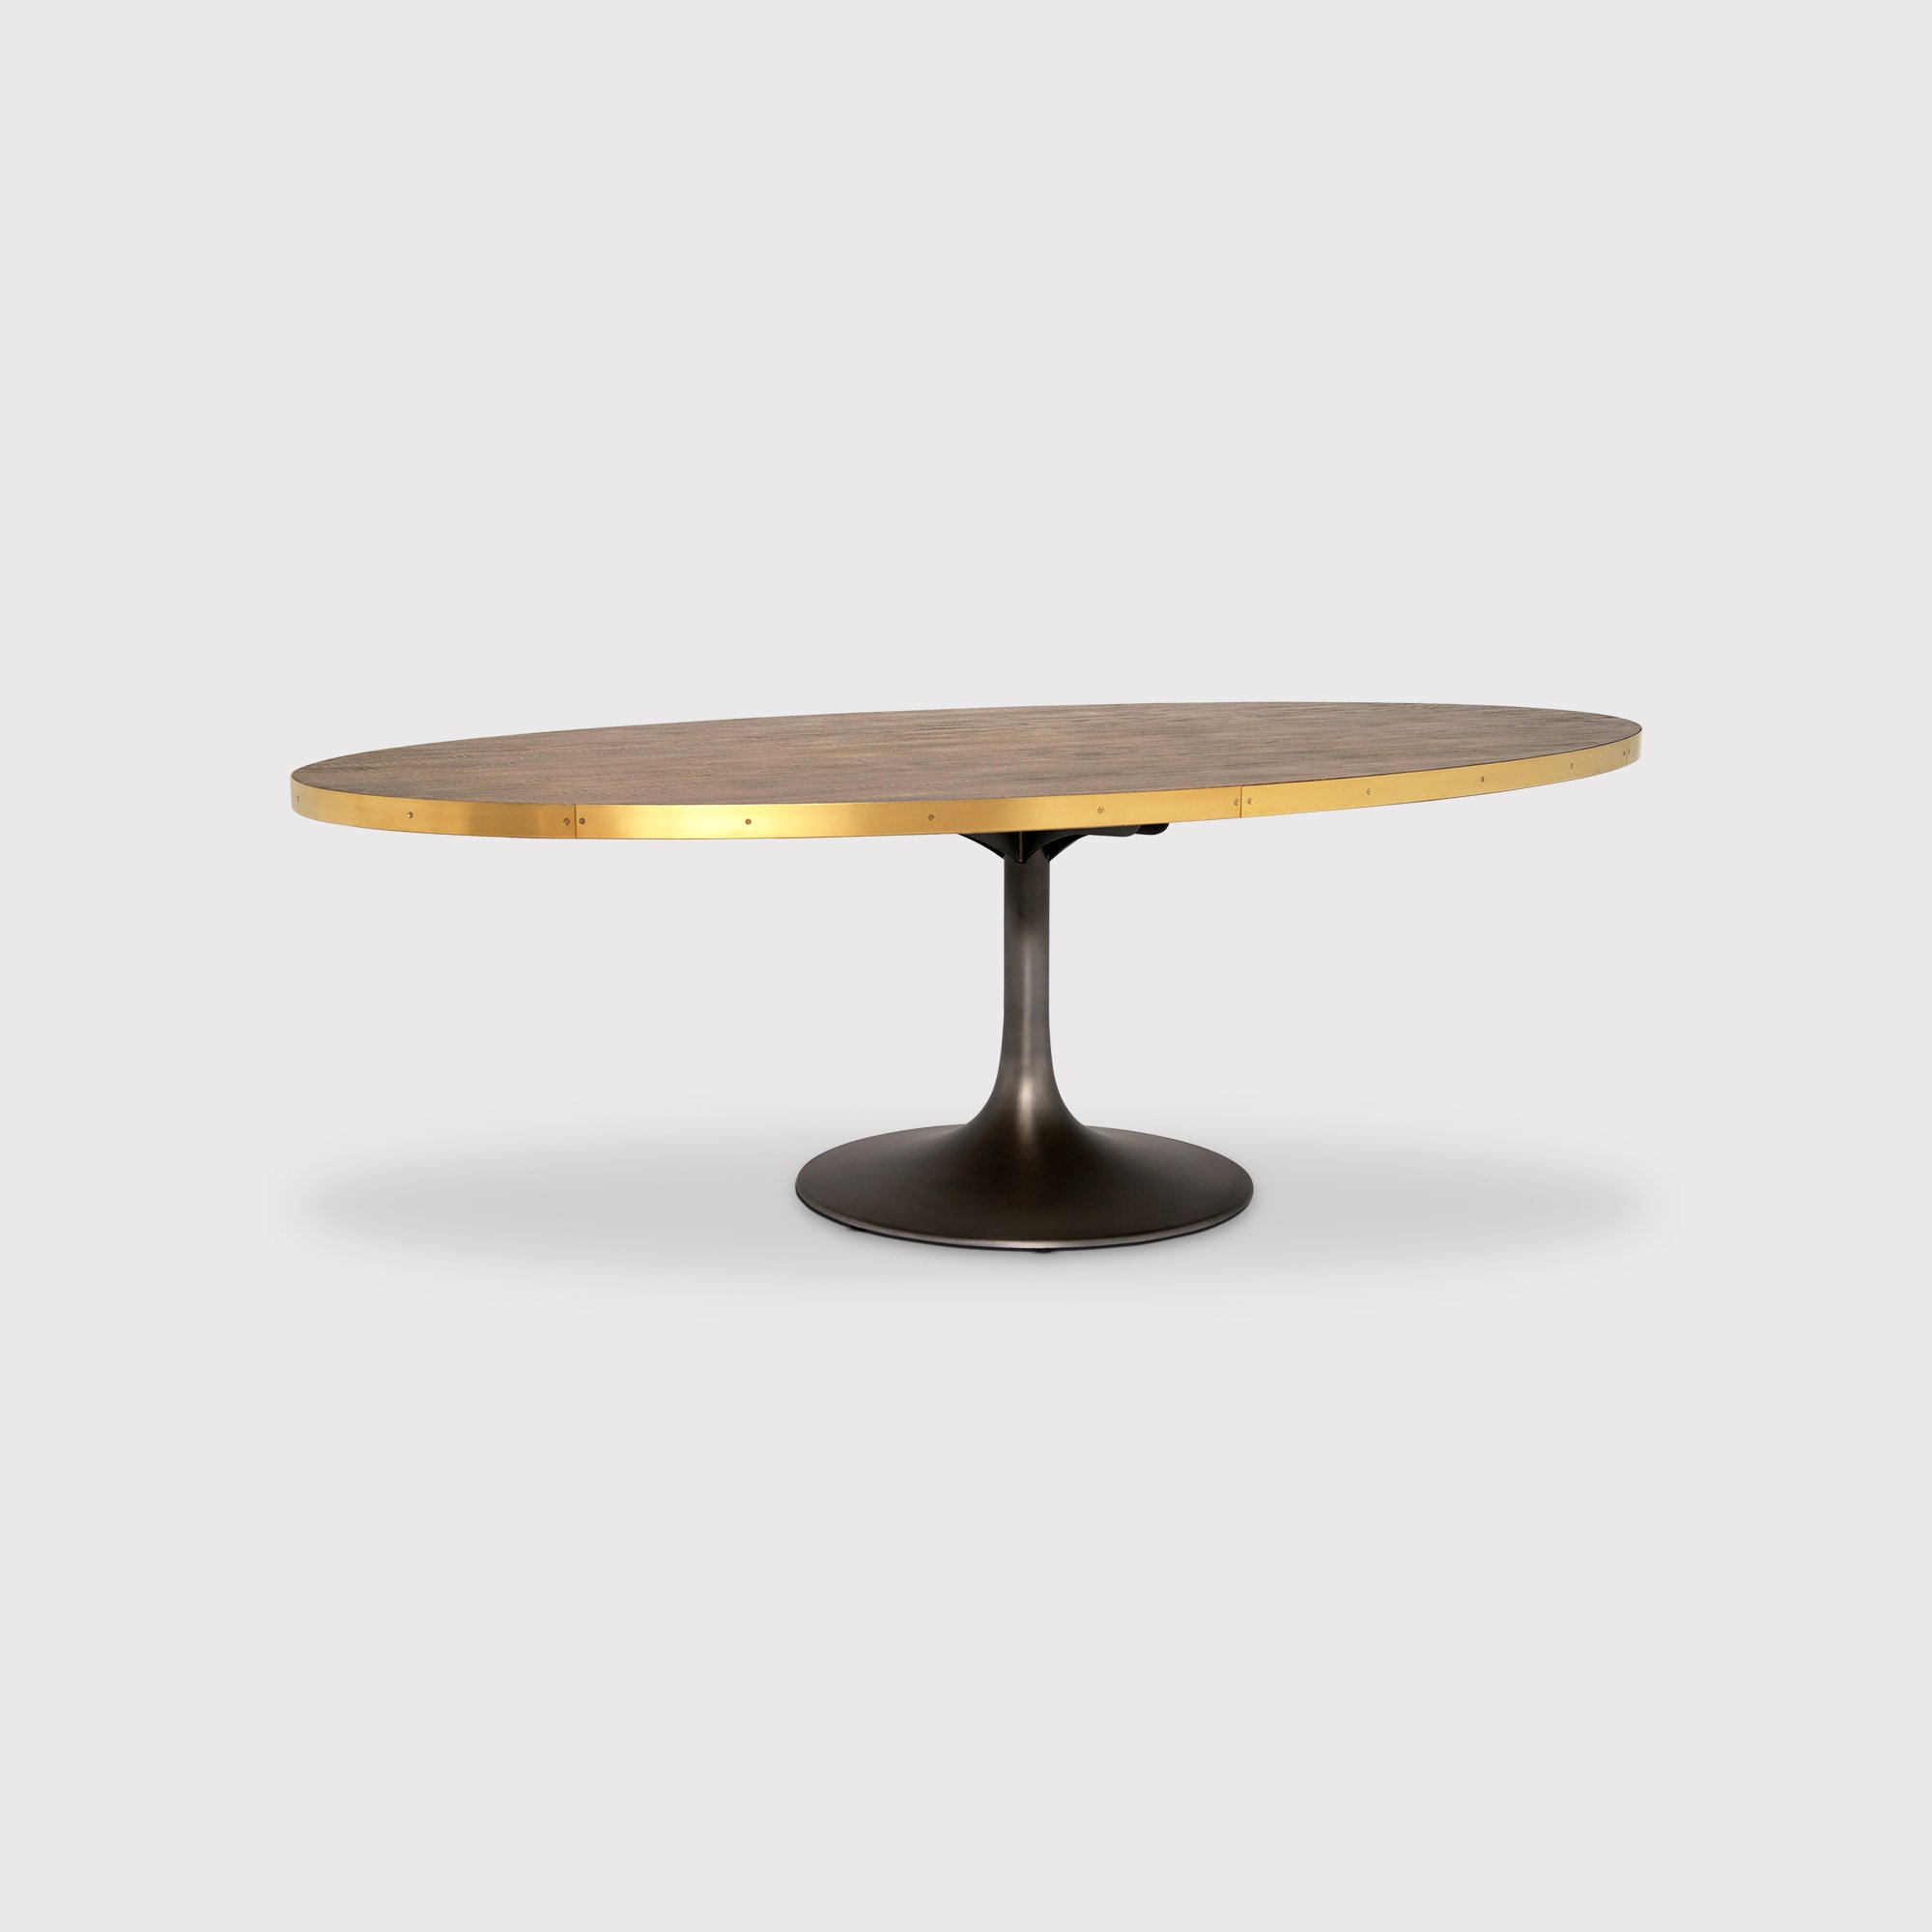 Talula Tulip Oval Dining Table 250x130x78cm, Neutral Wood | Barker & Stonehouse